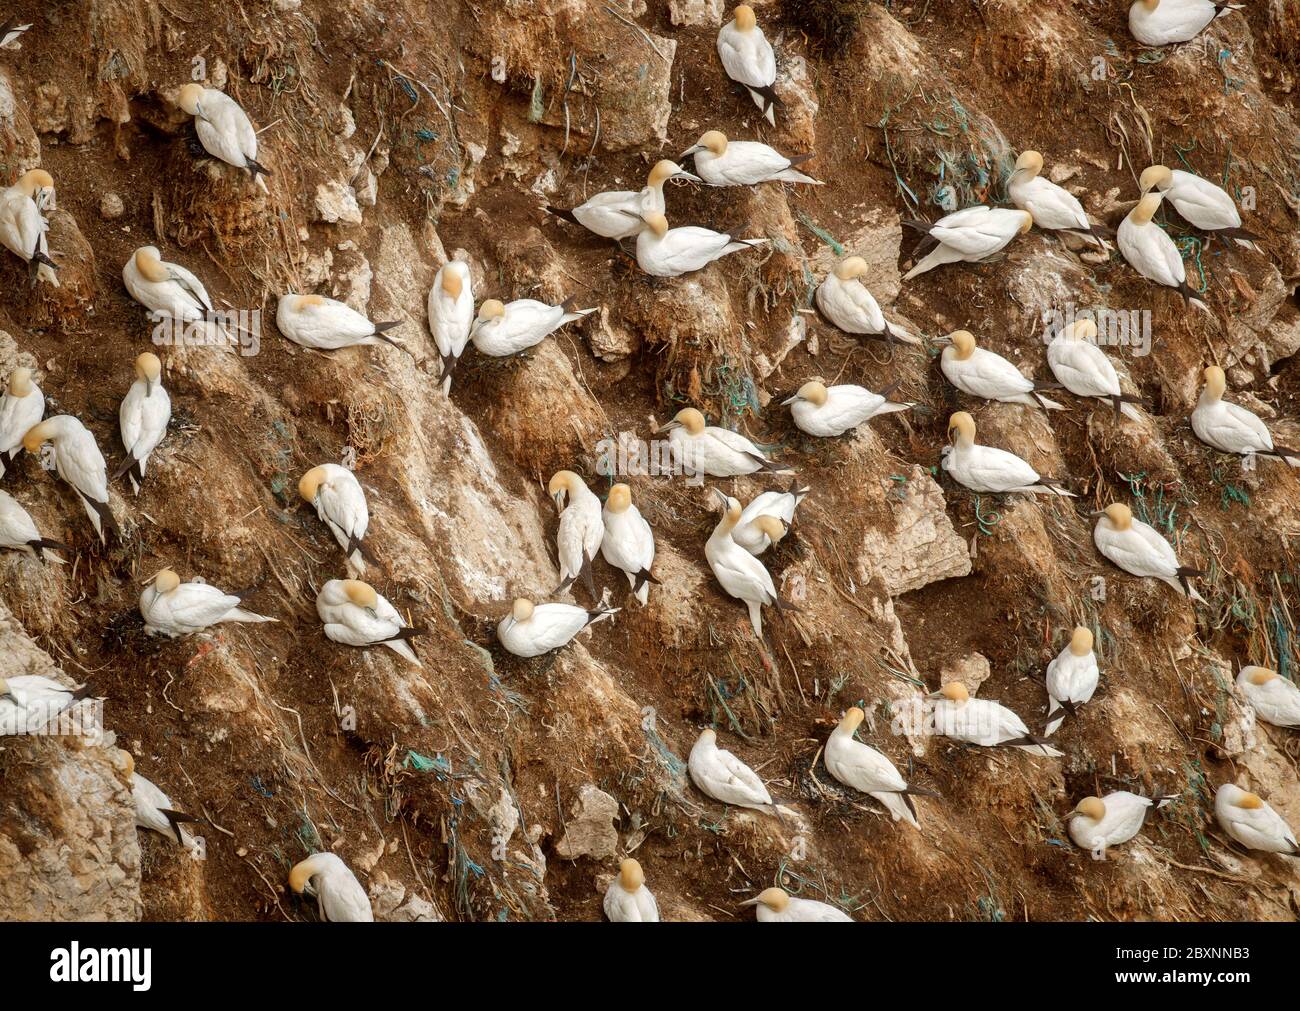 Gannets nest at Bempton Cliffs in Yorkshire, as over 250,000 seabirds flock to the chalk cliffs to find a mate and raise their young. From April to August the cliffs come alive with nest-building adults and young chicks. Stock Photo